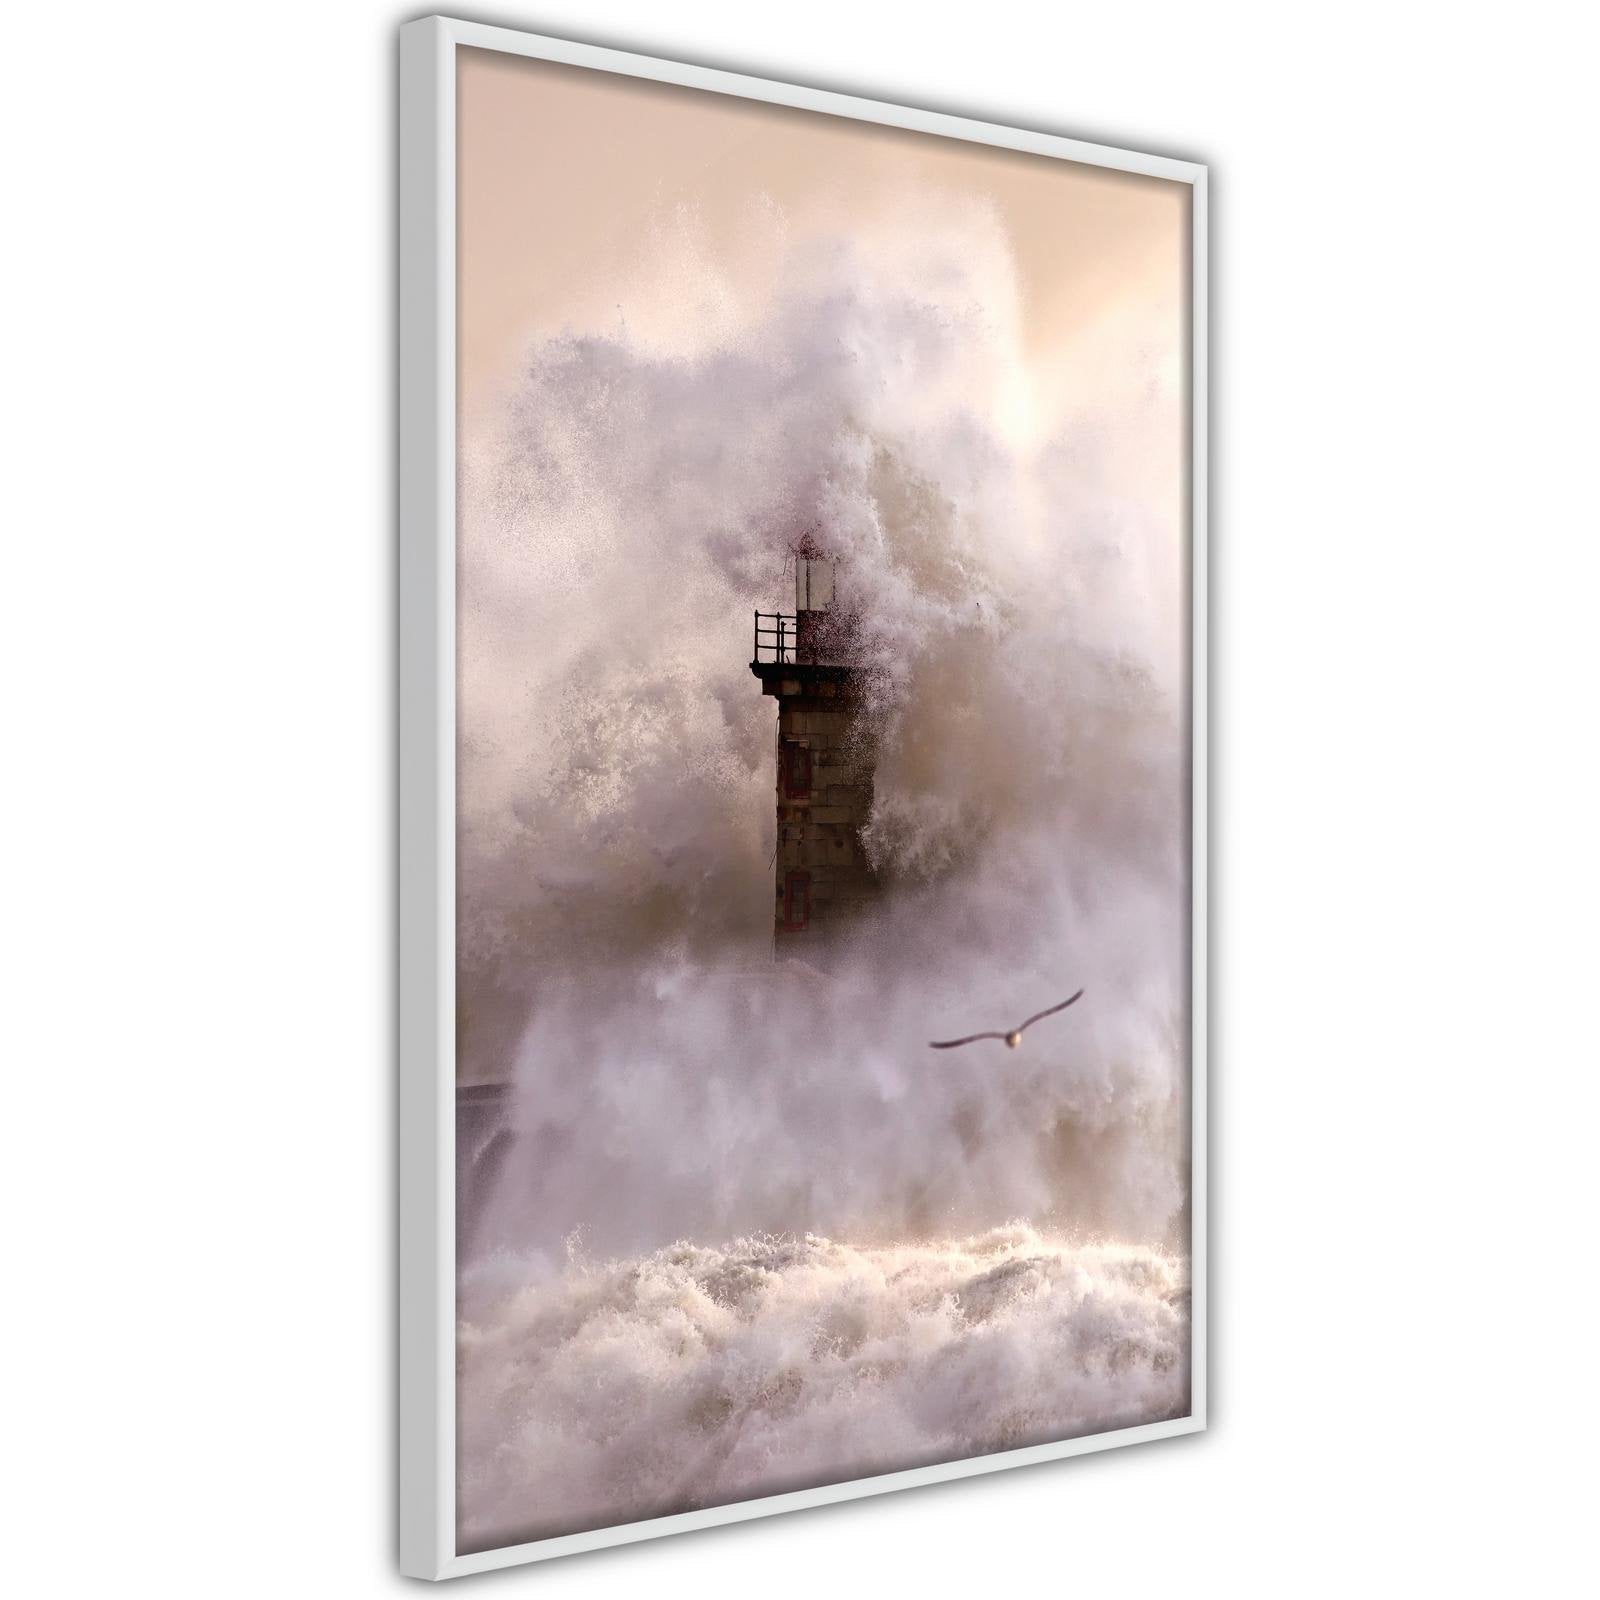 Inramad Poster / Tavla - Lighthouse During a Storm-Poster Inramad-Artgeist-peaceofhome.se